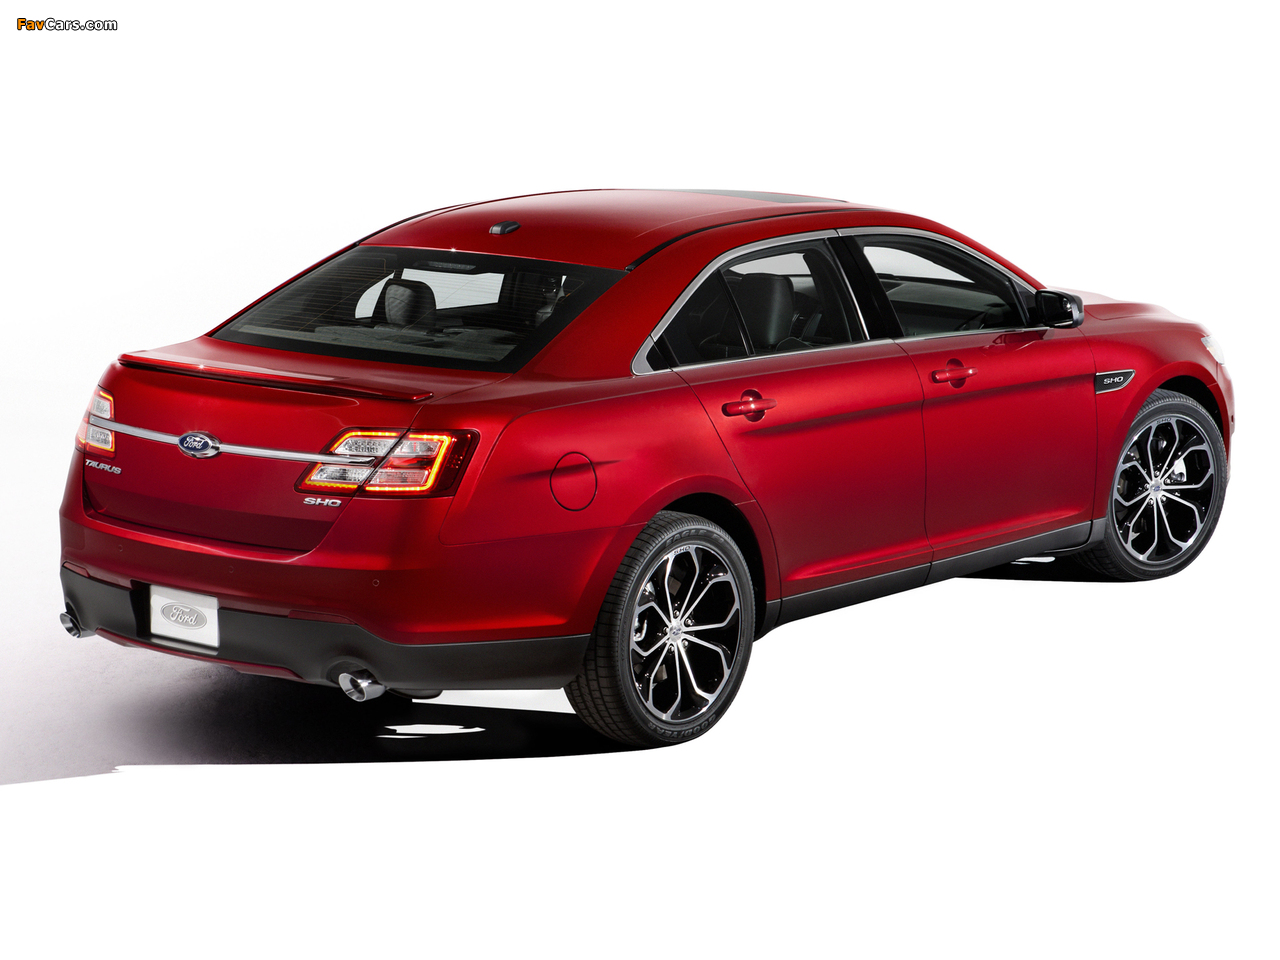 Ford Taurus SHO 2011 images (1280 x 960)